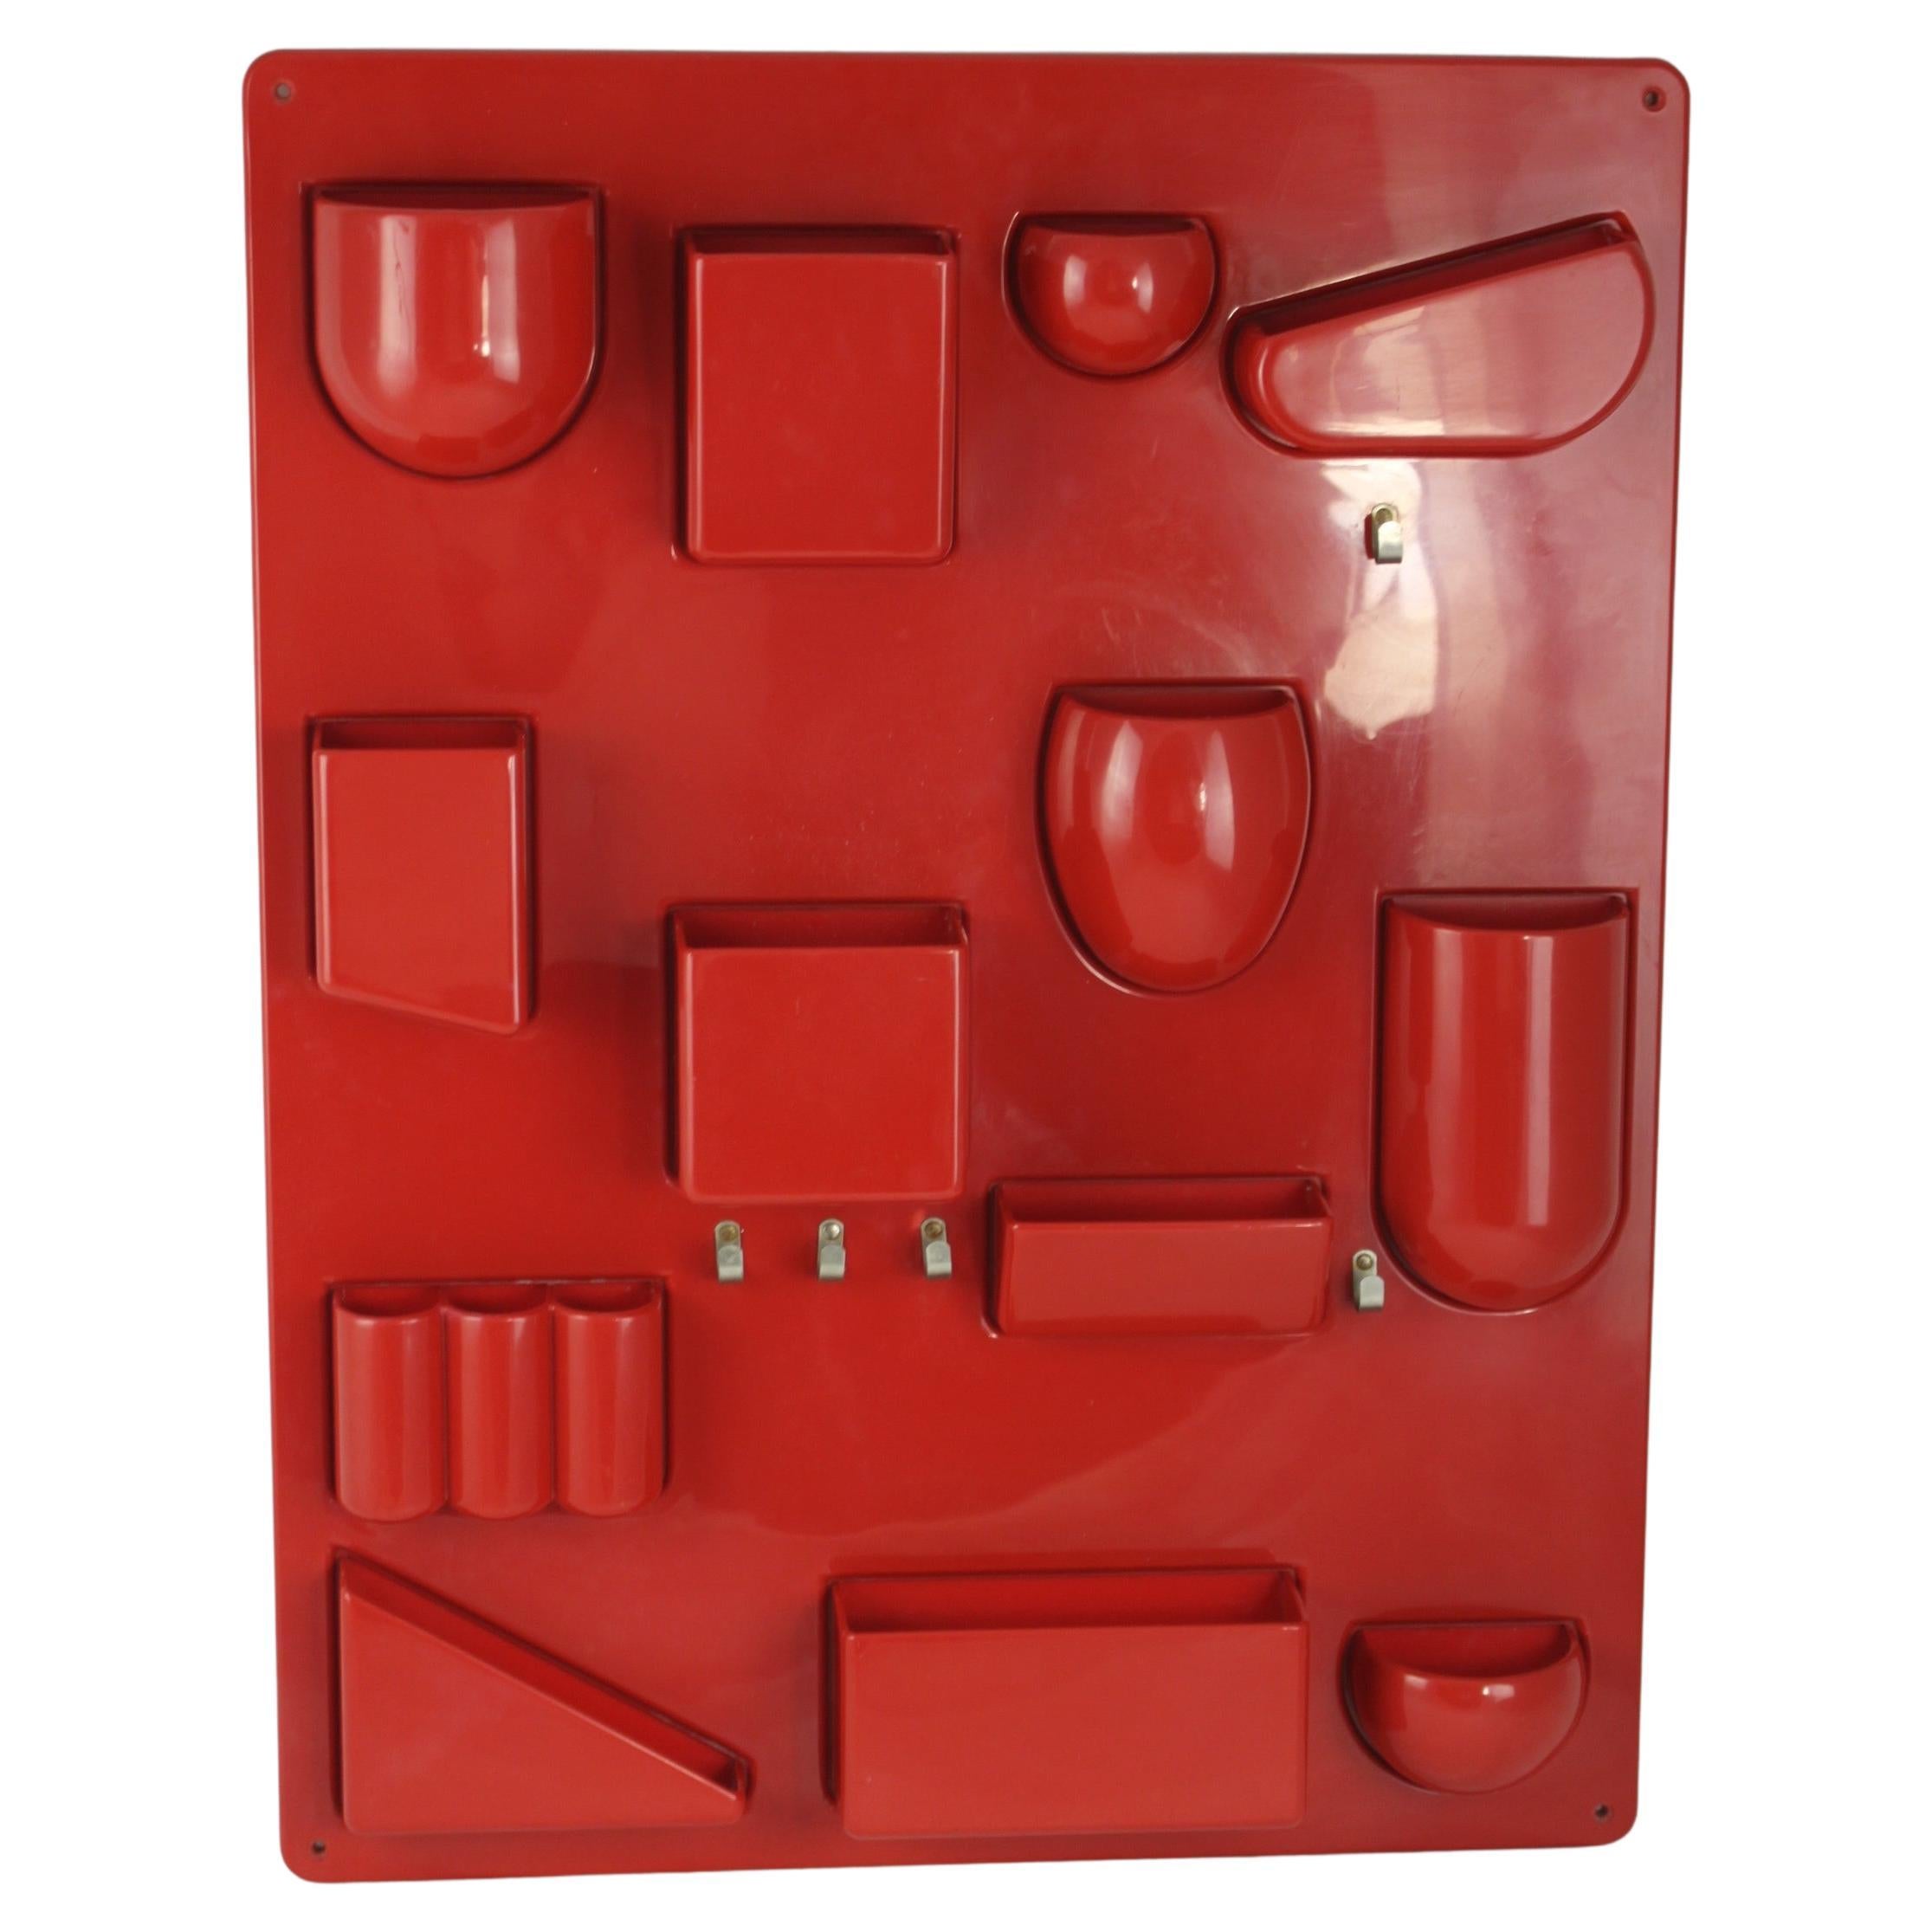 Utensilo II Wall Organizer by Dorothee Maurer Becker for Design M, Germany, 1970 For Sale